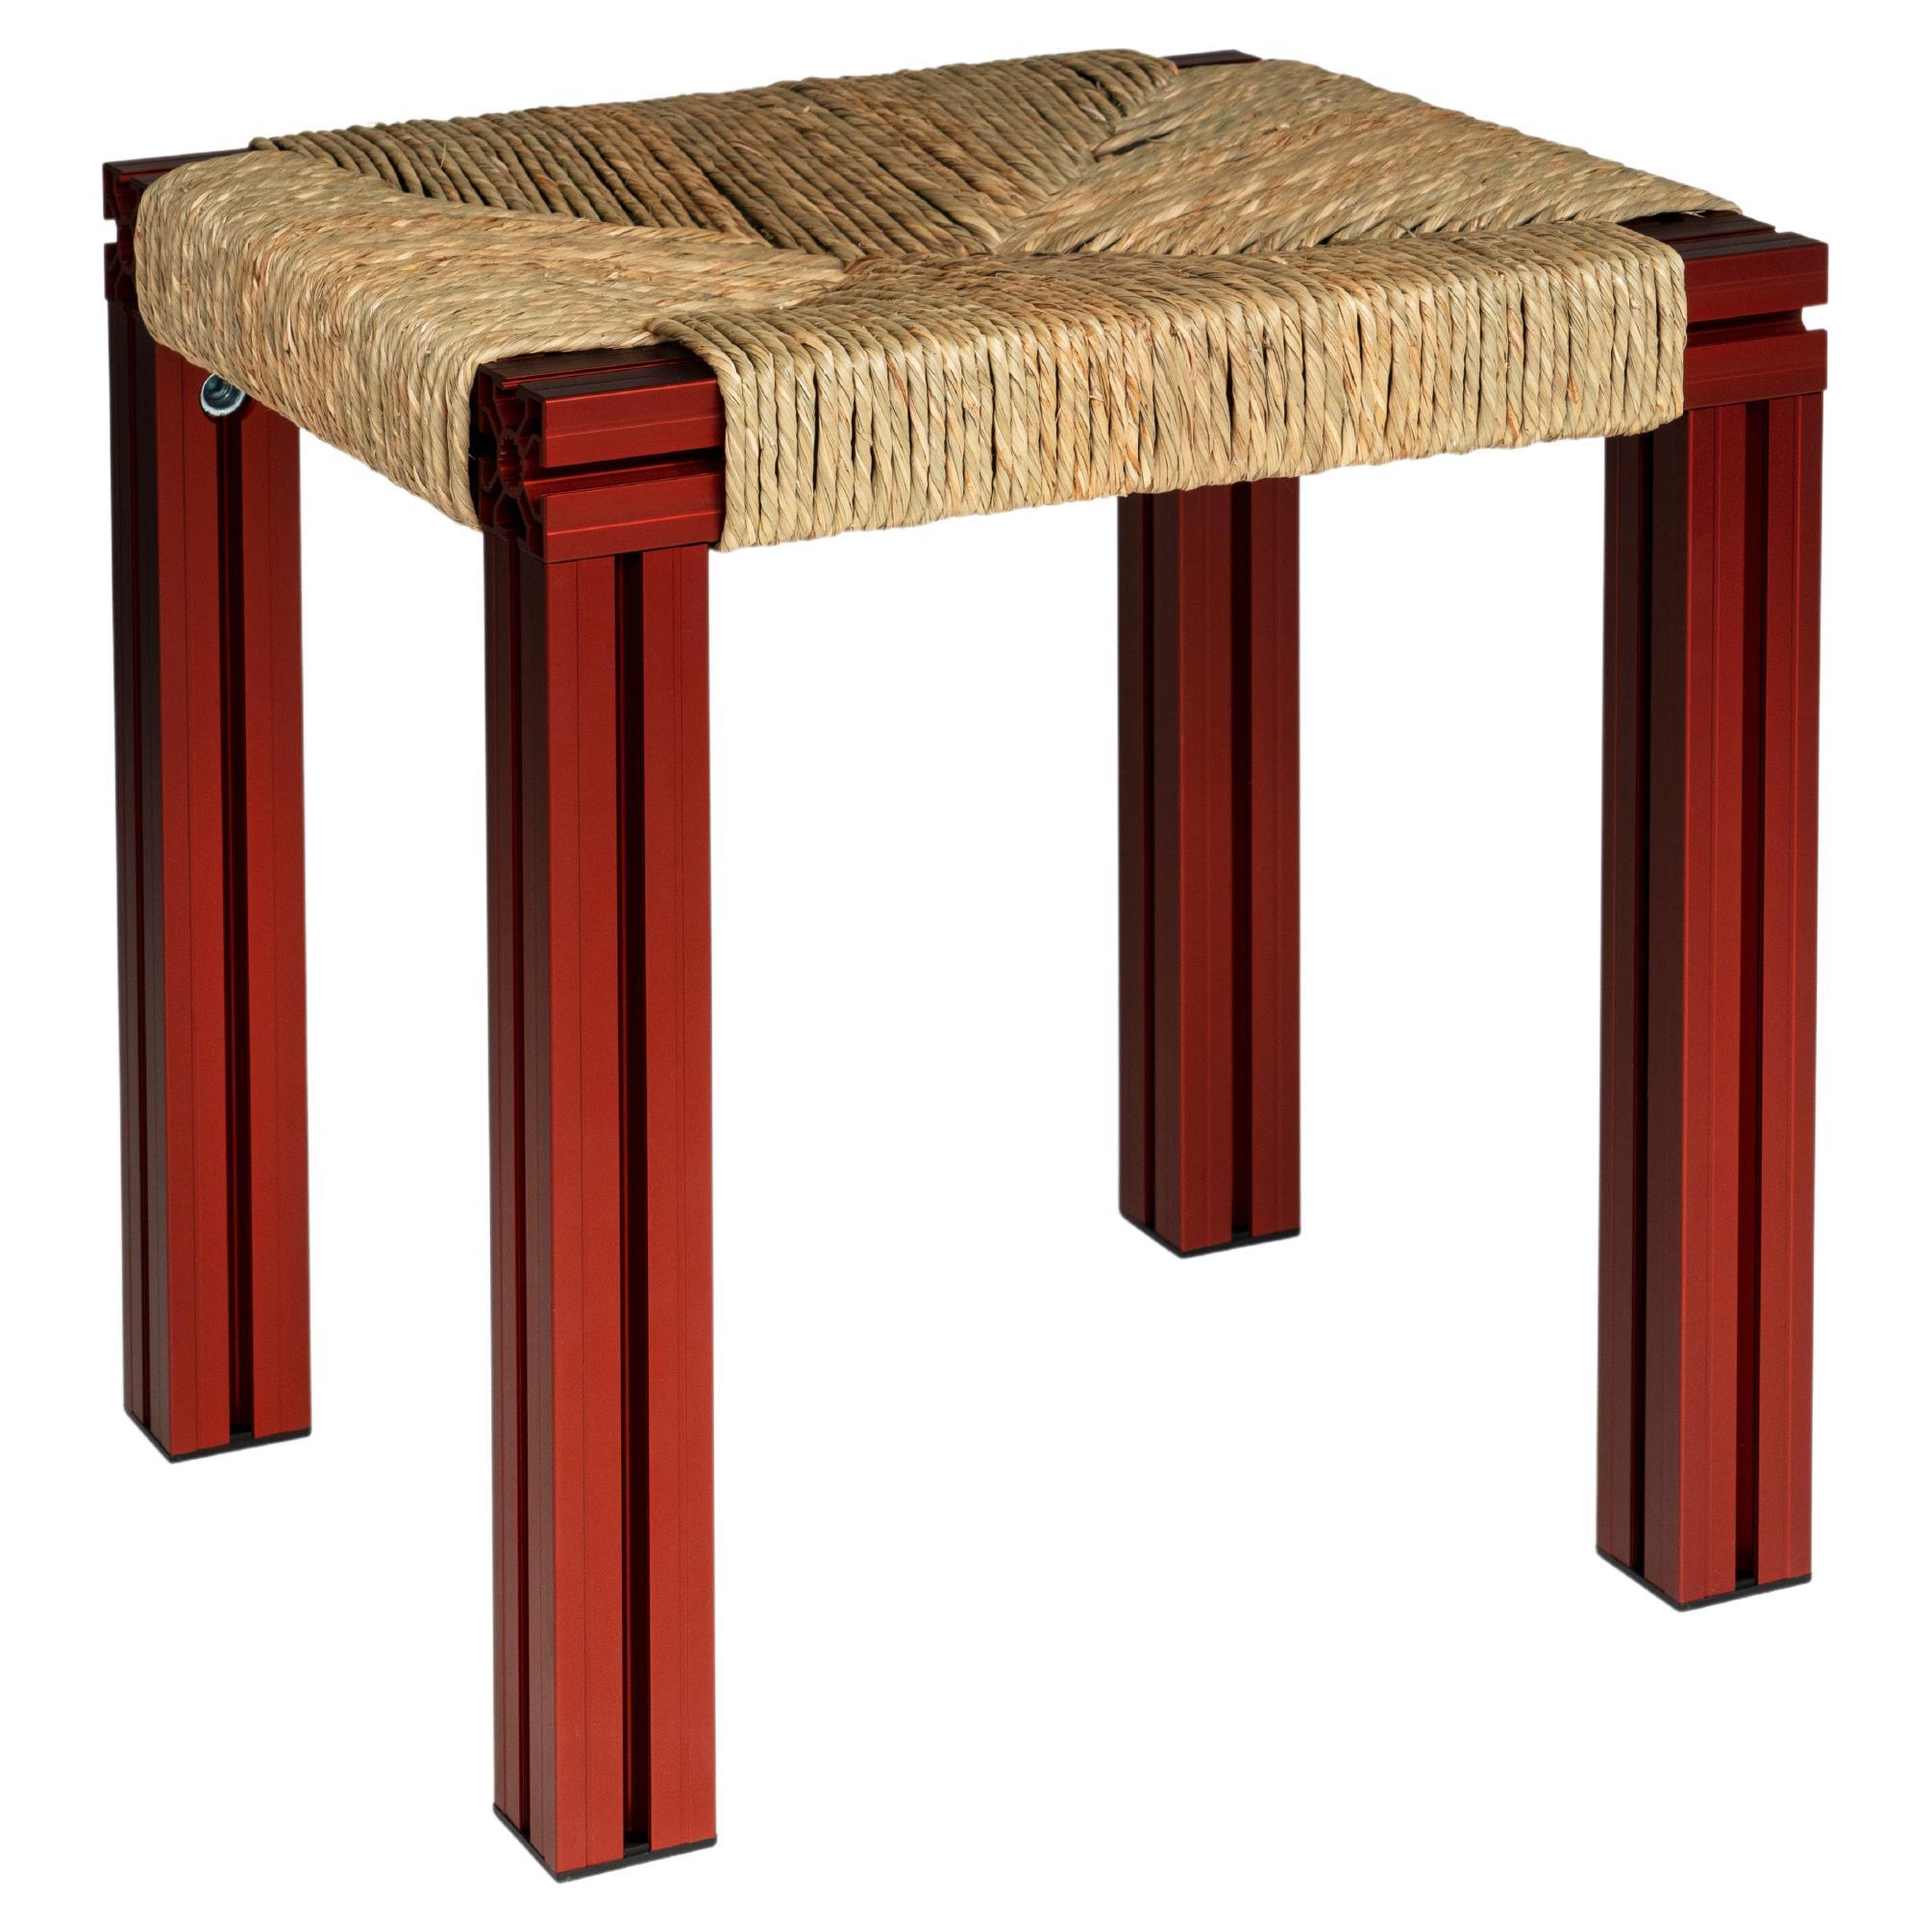 Anodized Burgundy and Rush Weave Wicker Stool by Tino Seubert For Sale